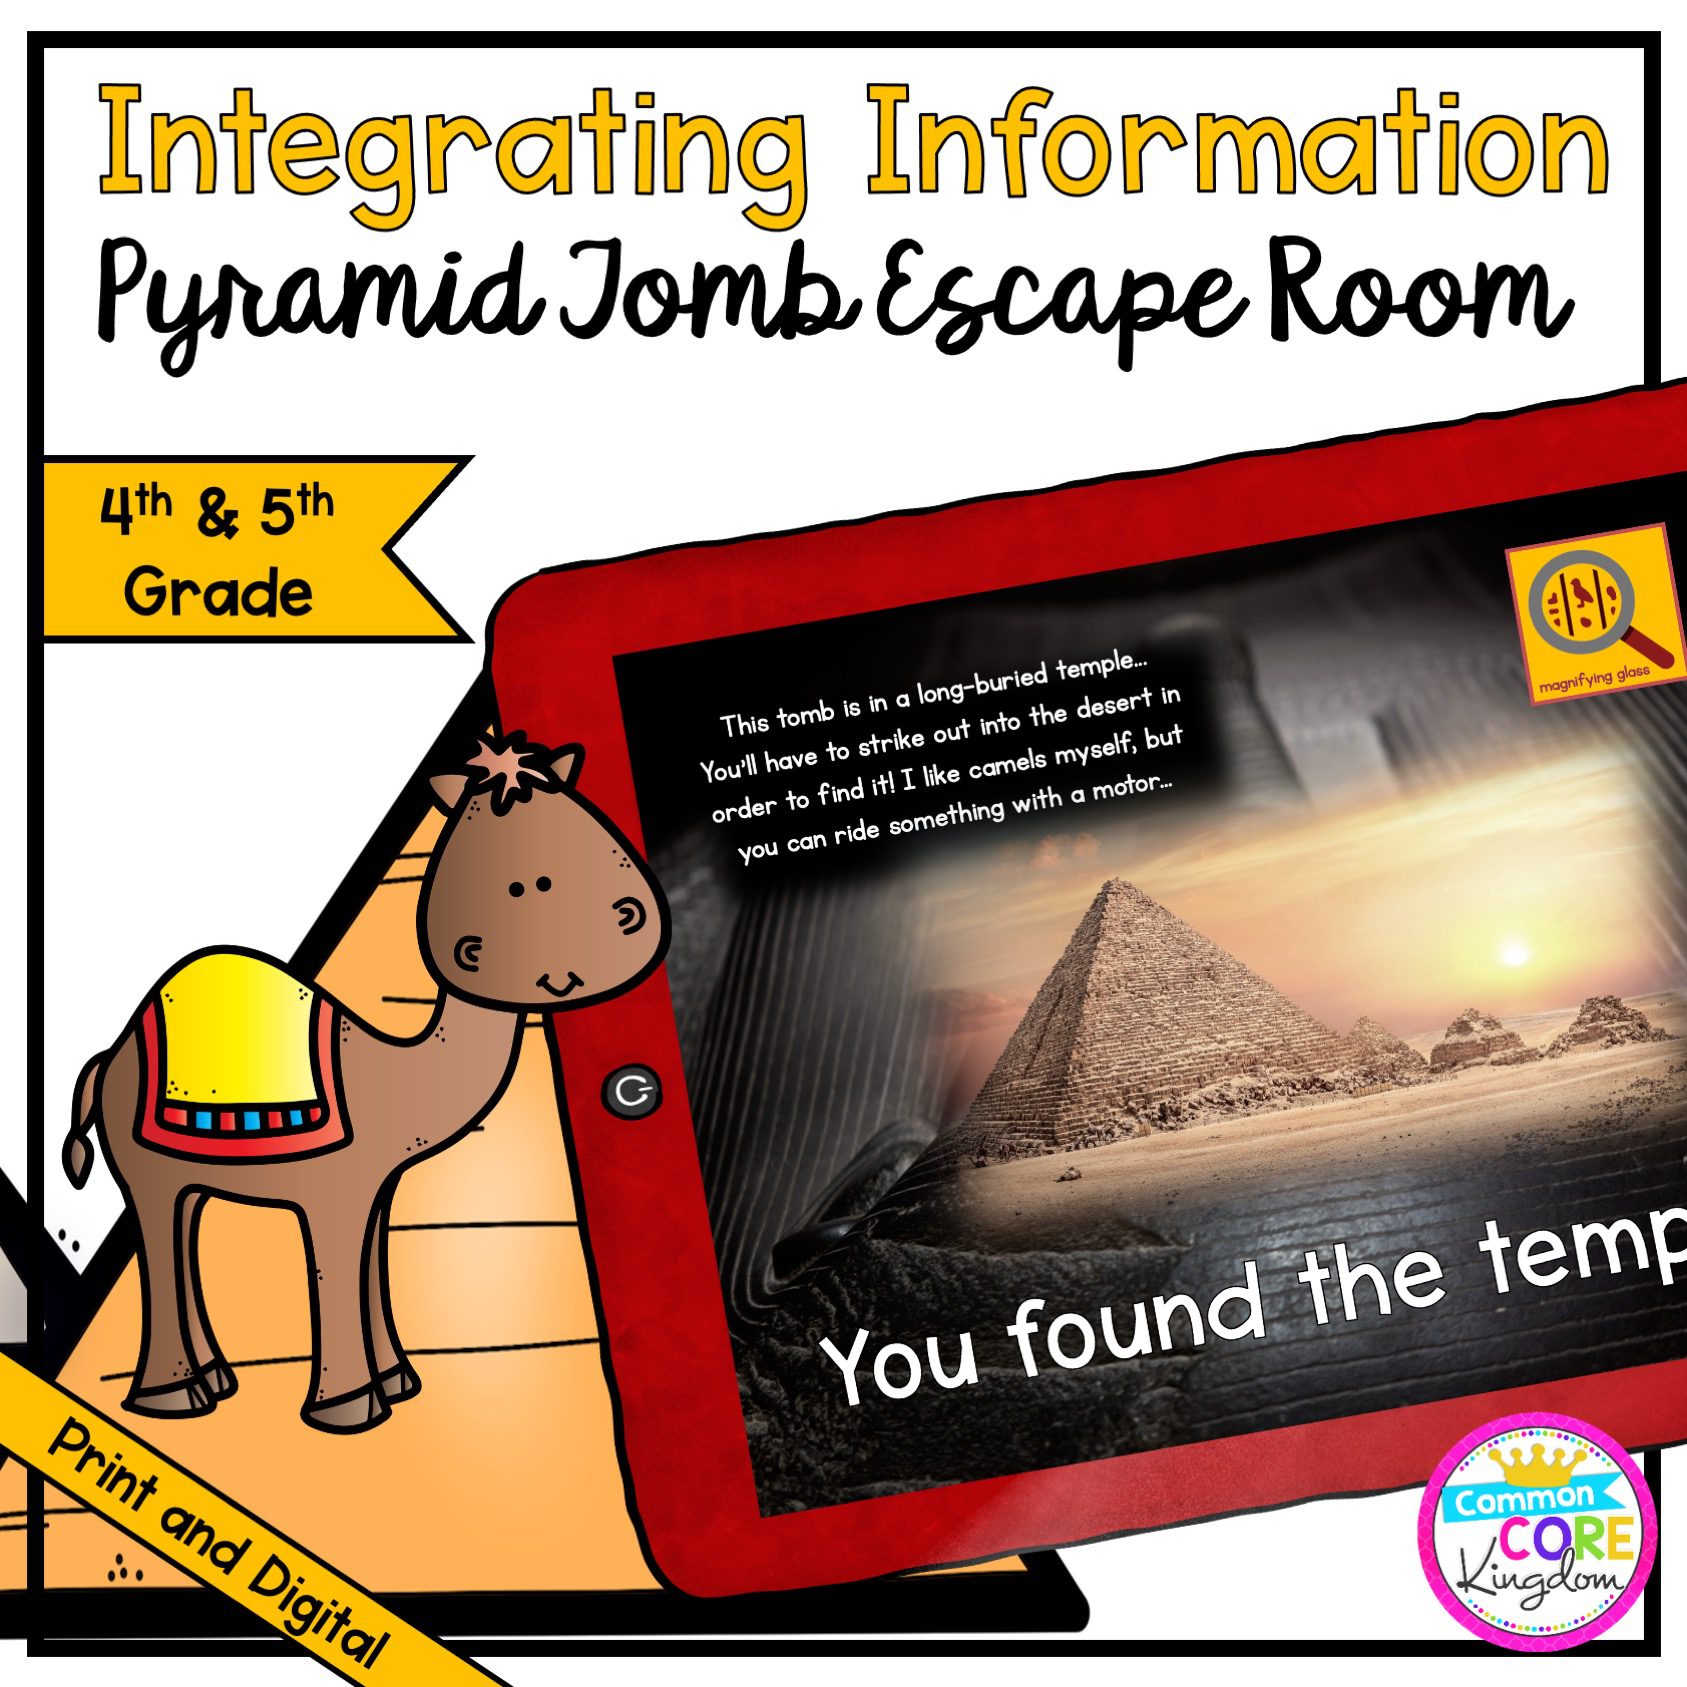 Integrating Information - Pyramid Tomb Escape Room for 4th & 5th Grade in Digital & Printable Format